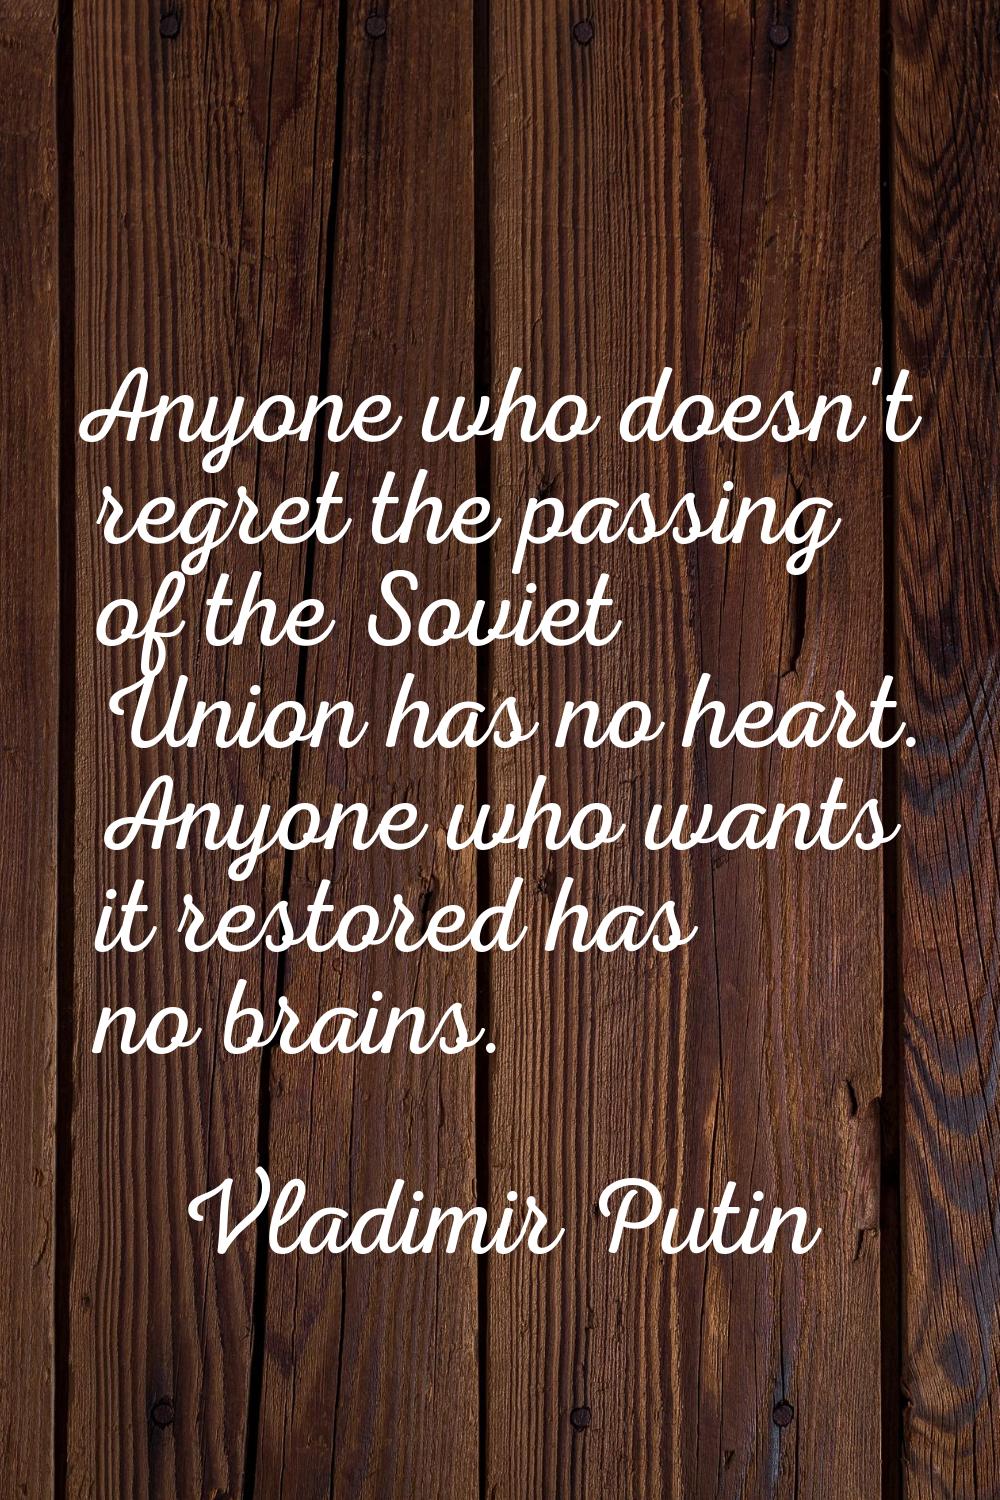 Anyone who doesn't regret the passing of the Soviet Union has no heart. Anyone who wants it restore